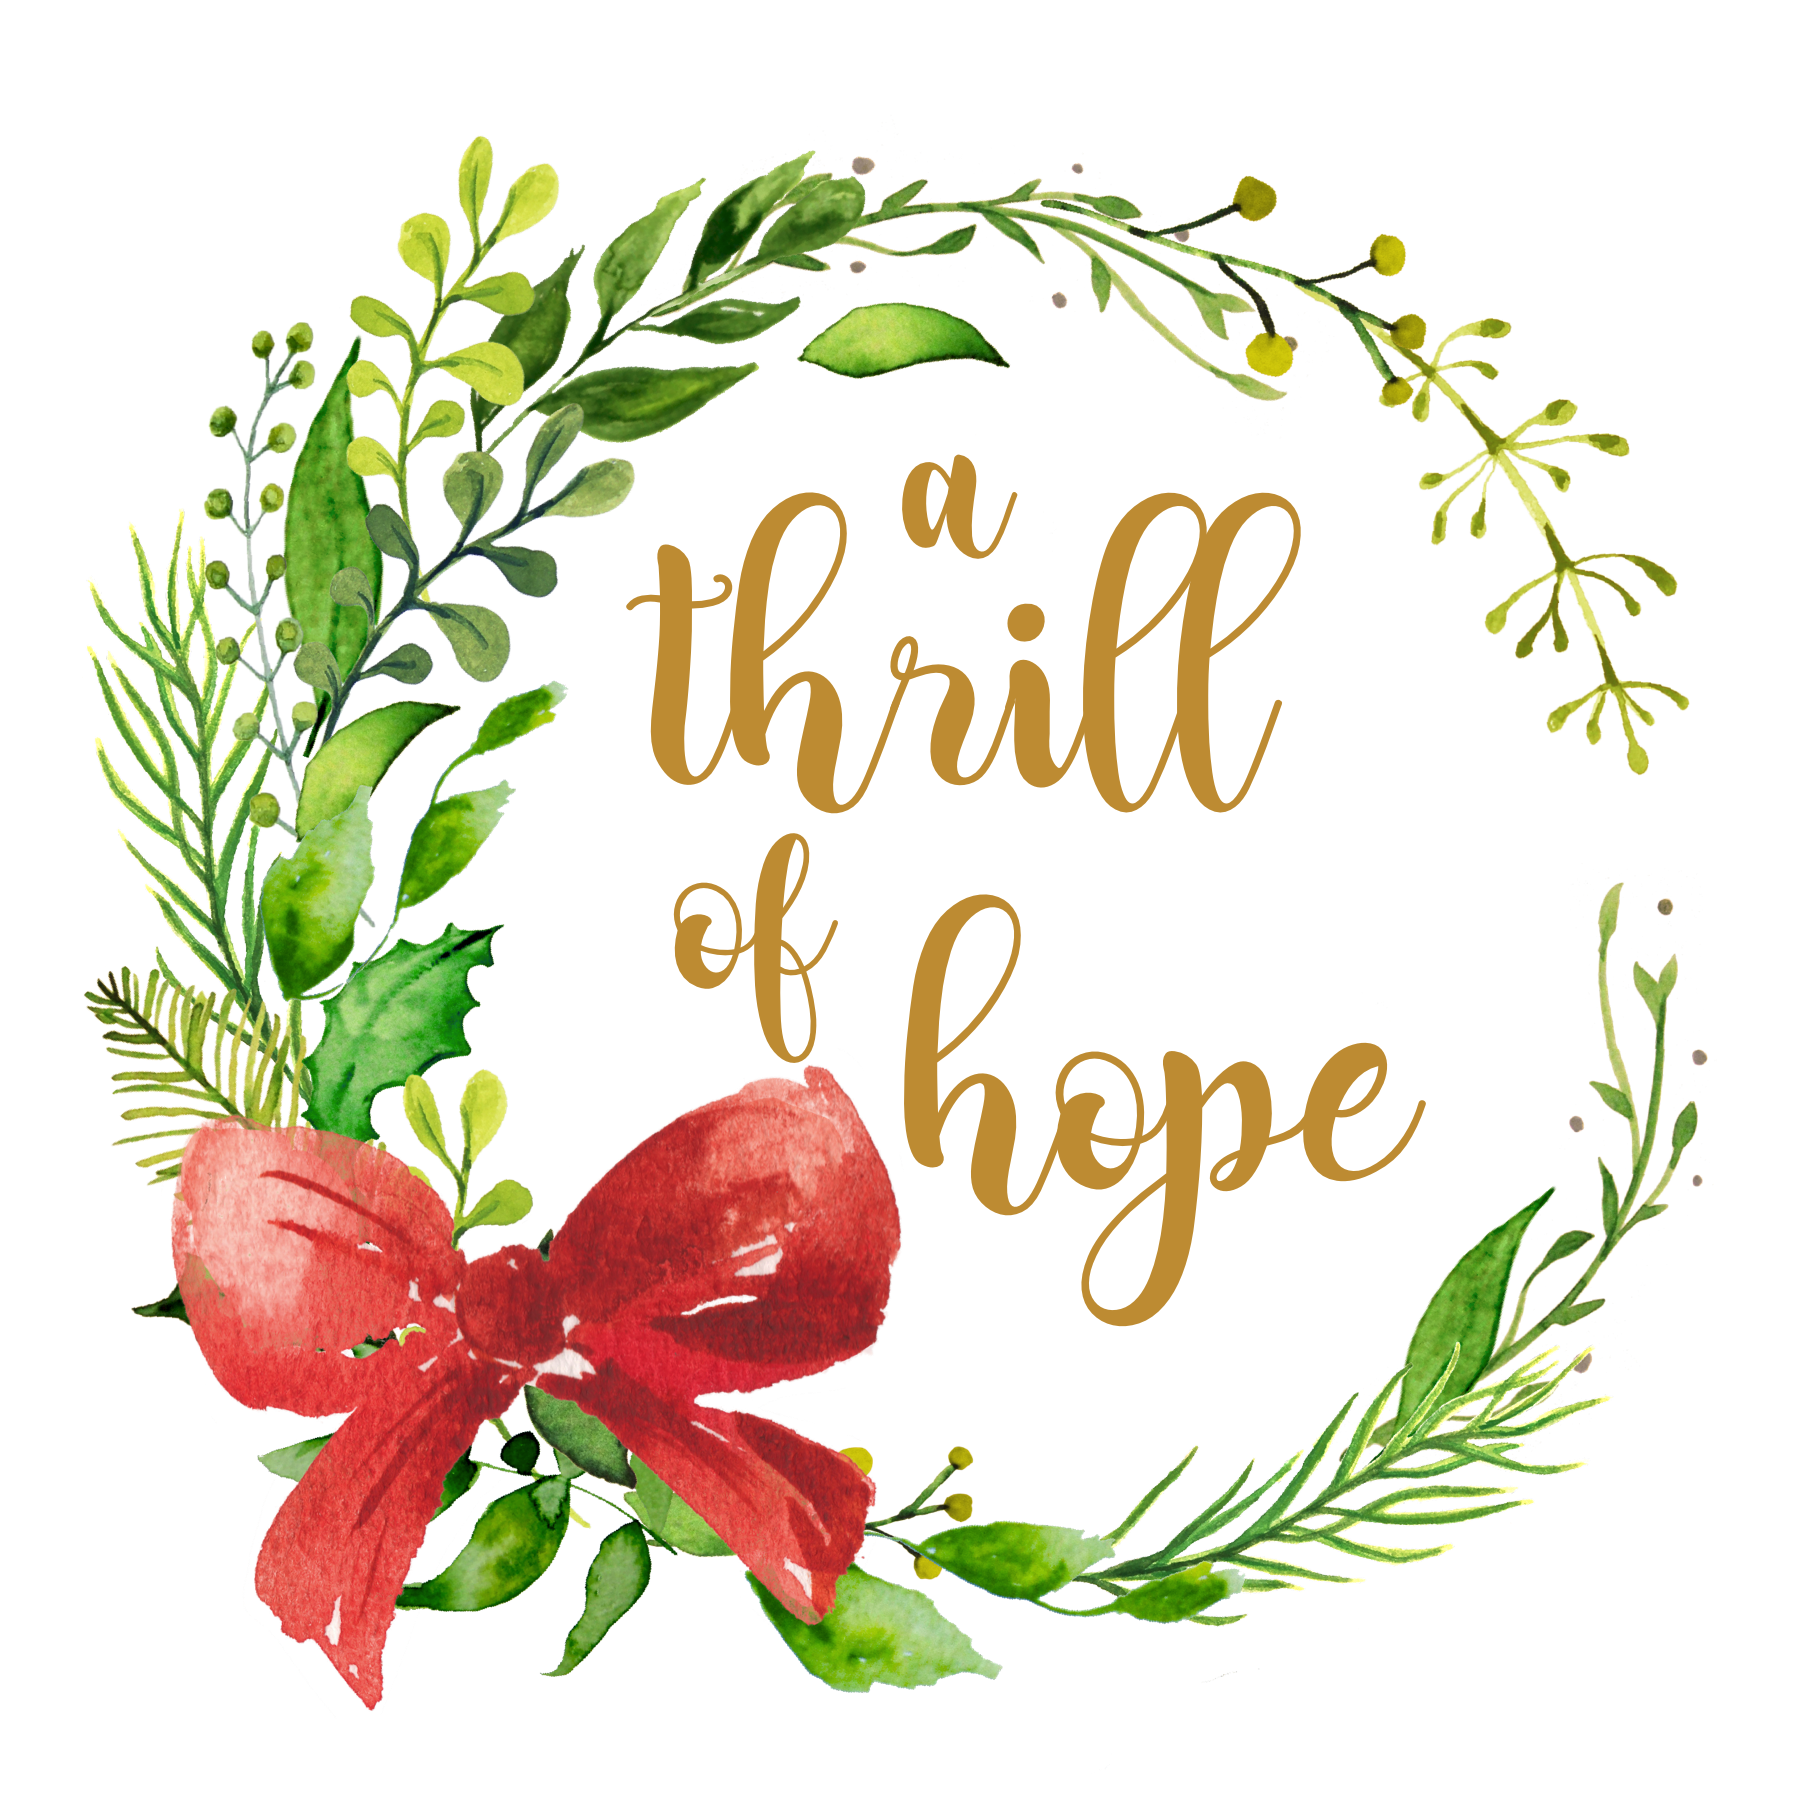 a thrill of hope